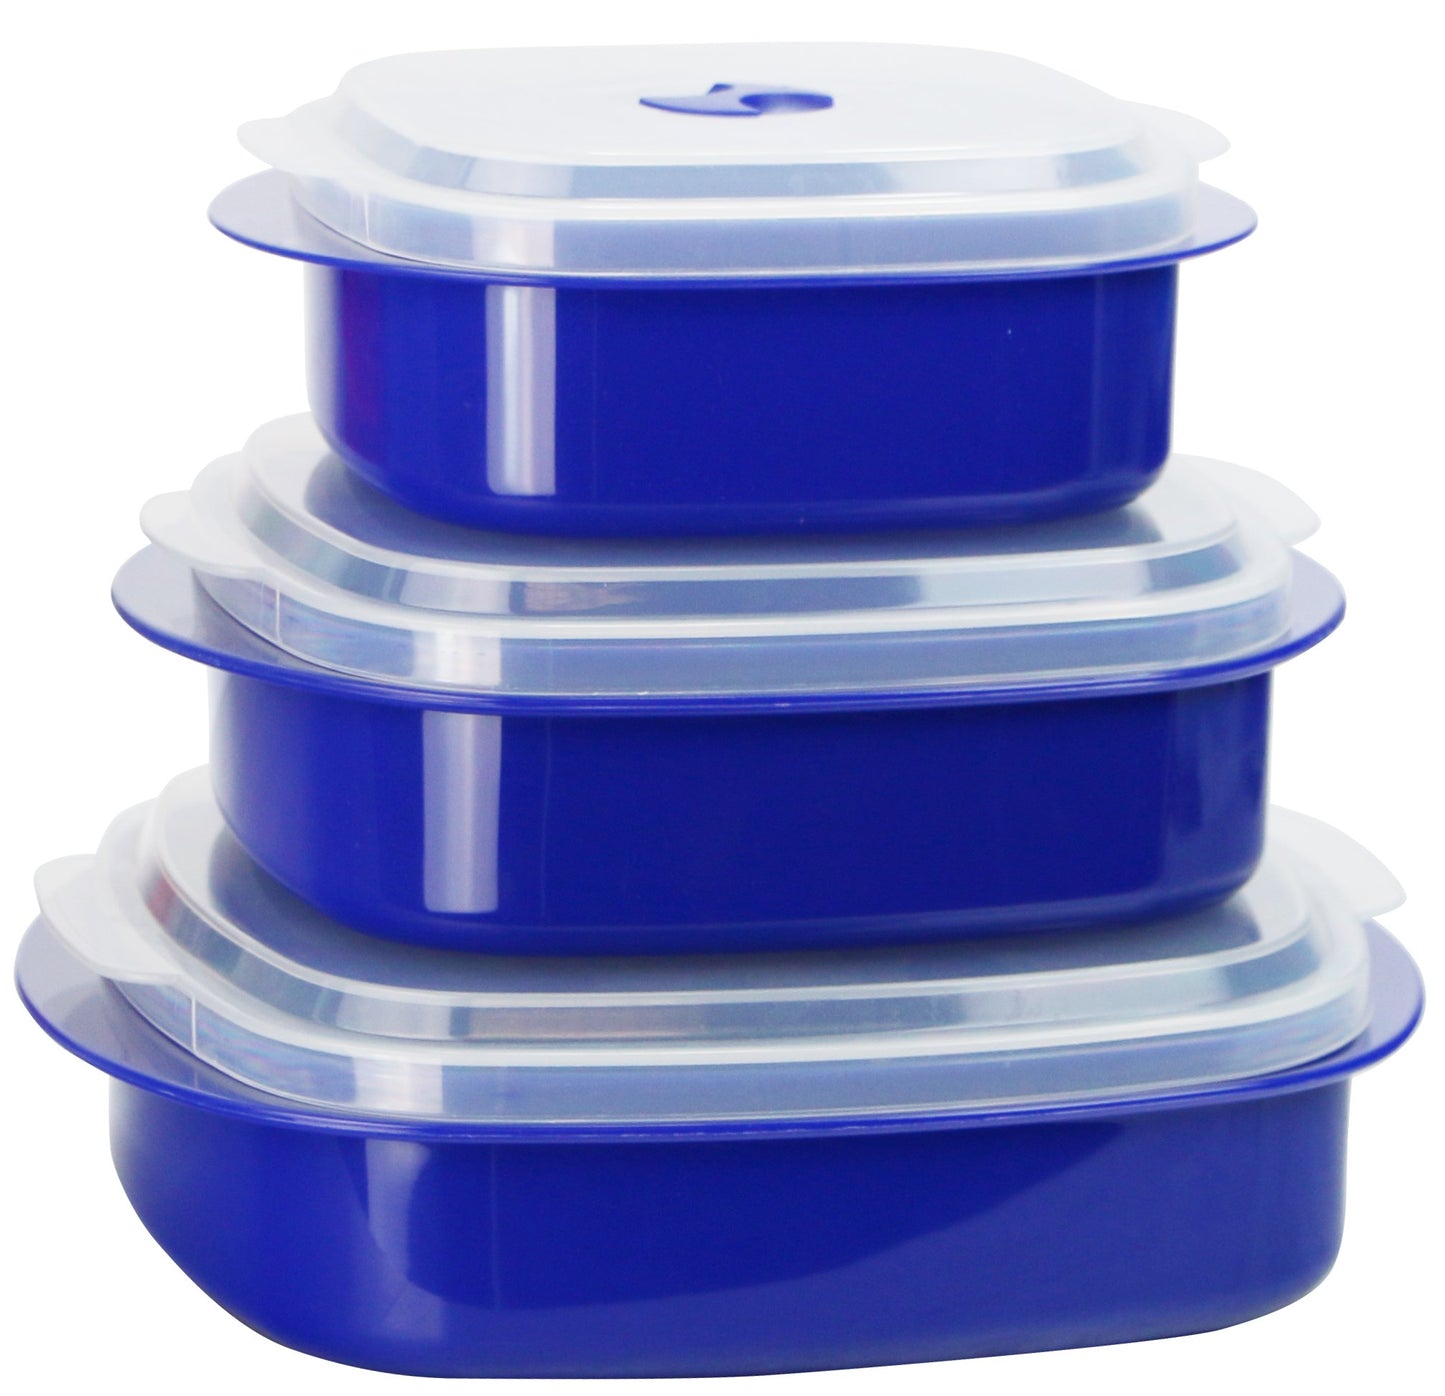 stack of 3 indigo storage containers with lids on white background.